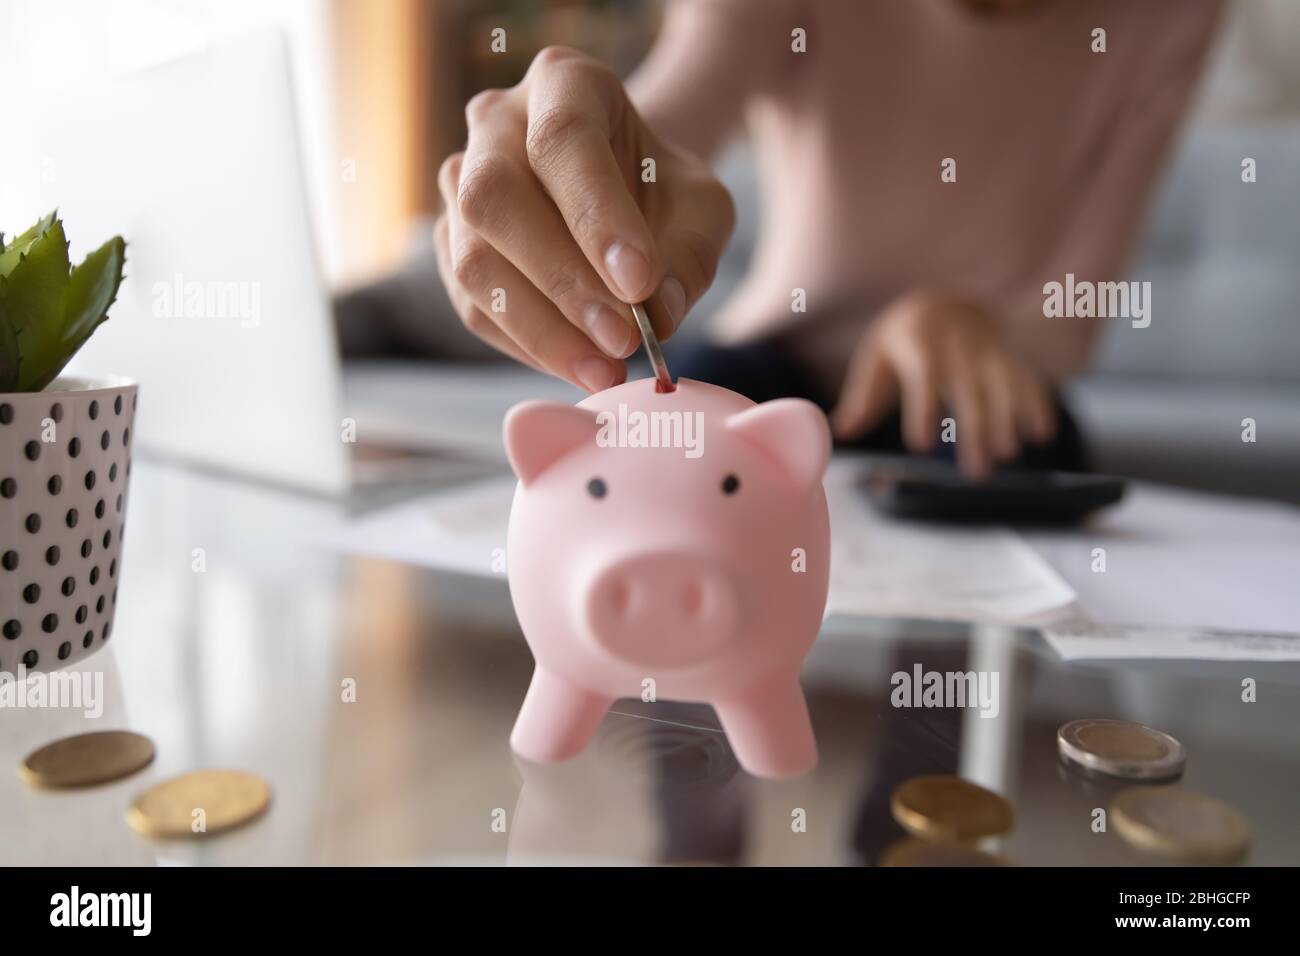 Woman saving money for household payments or utility bills. Stock Photo